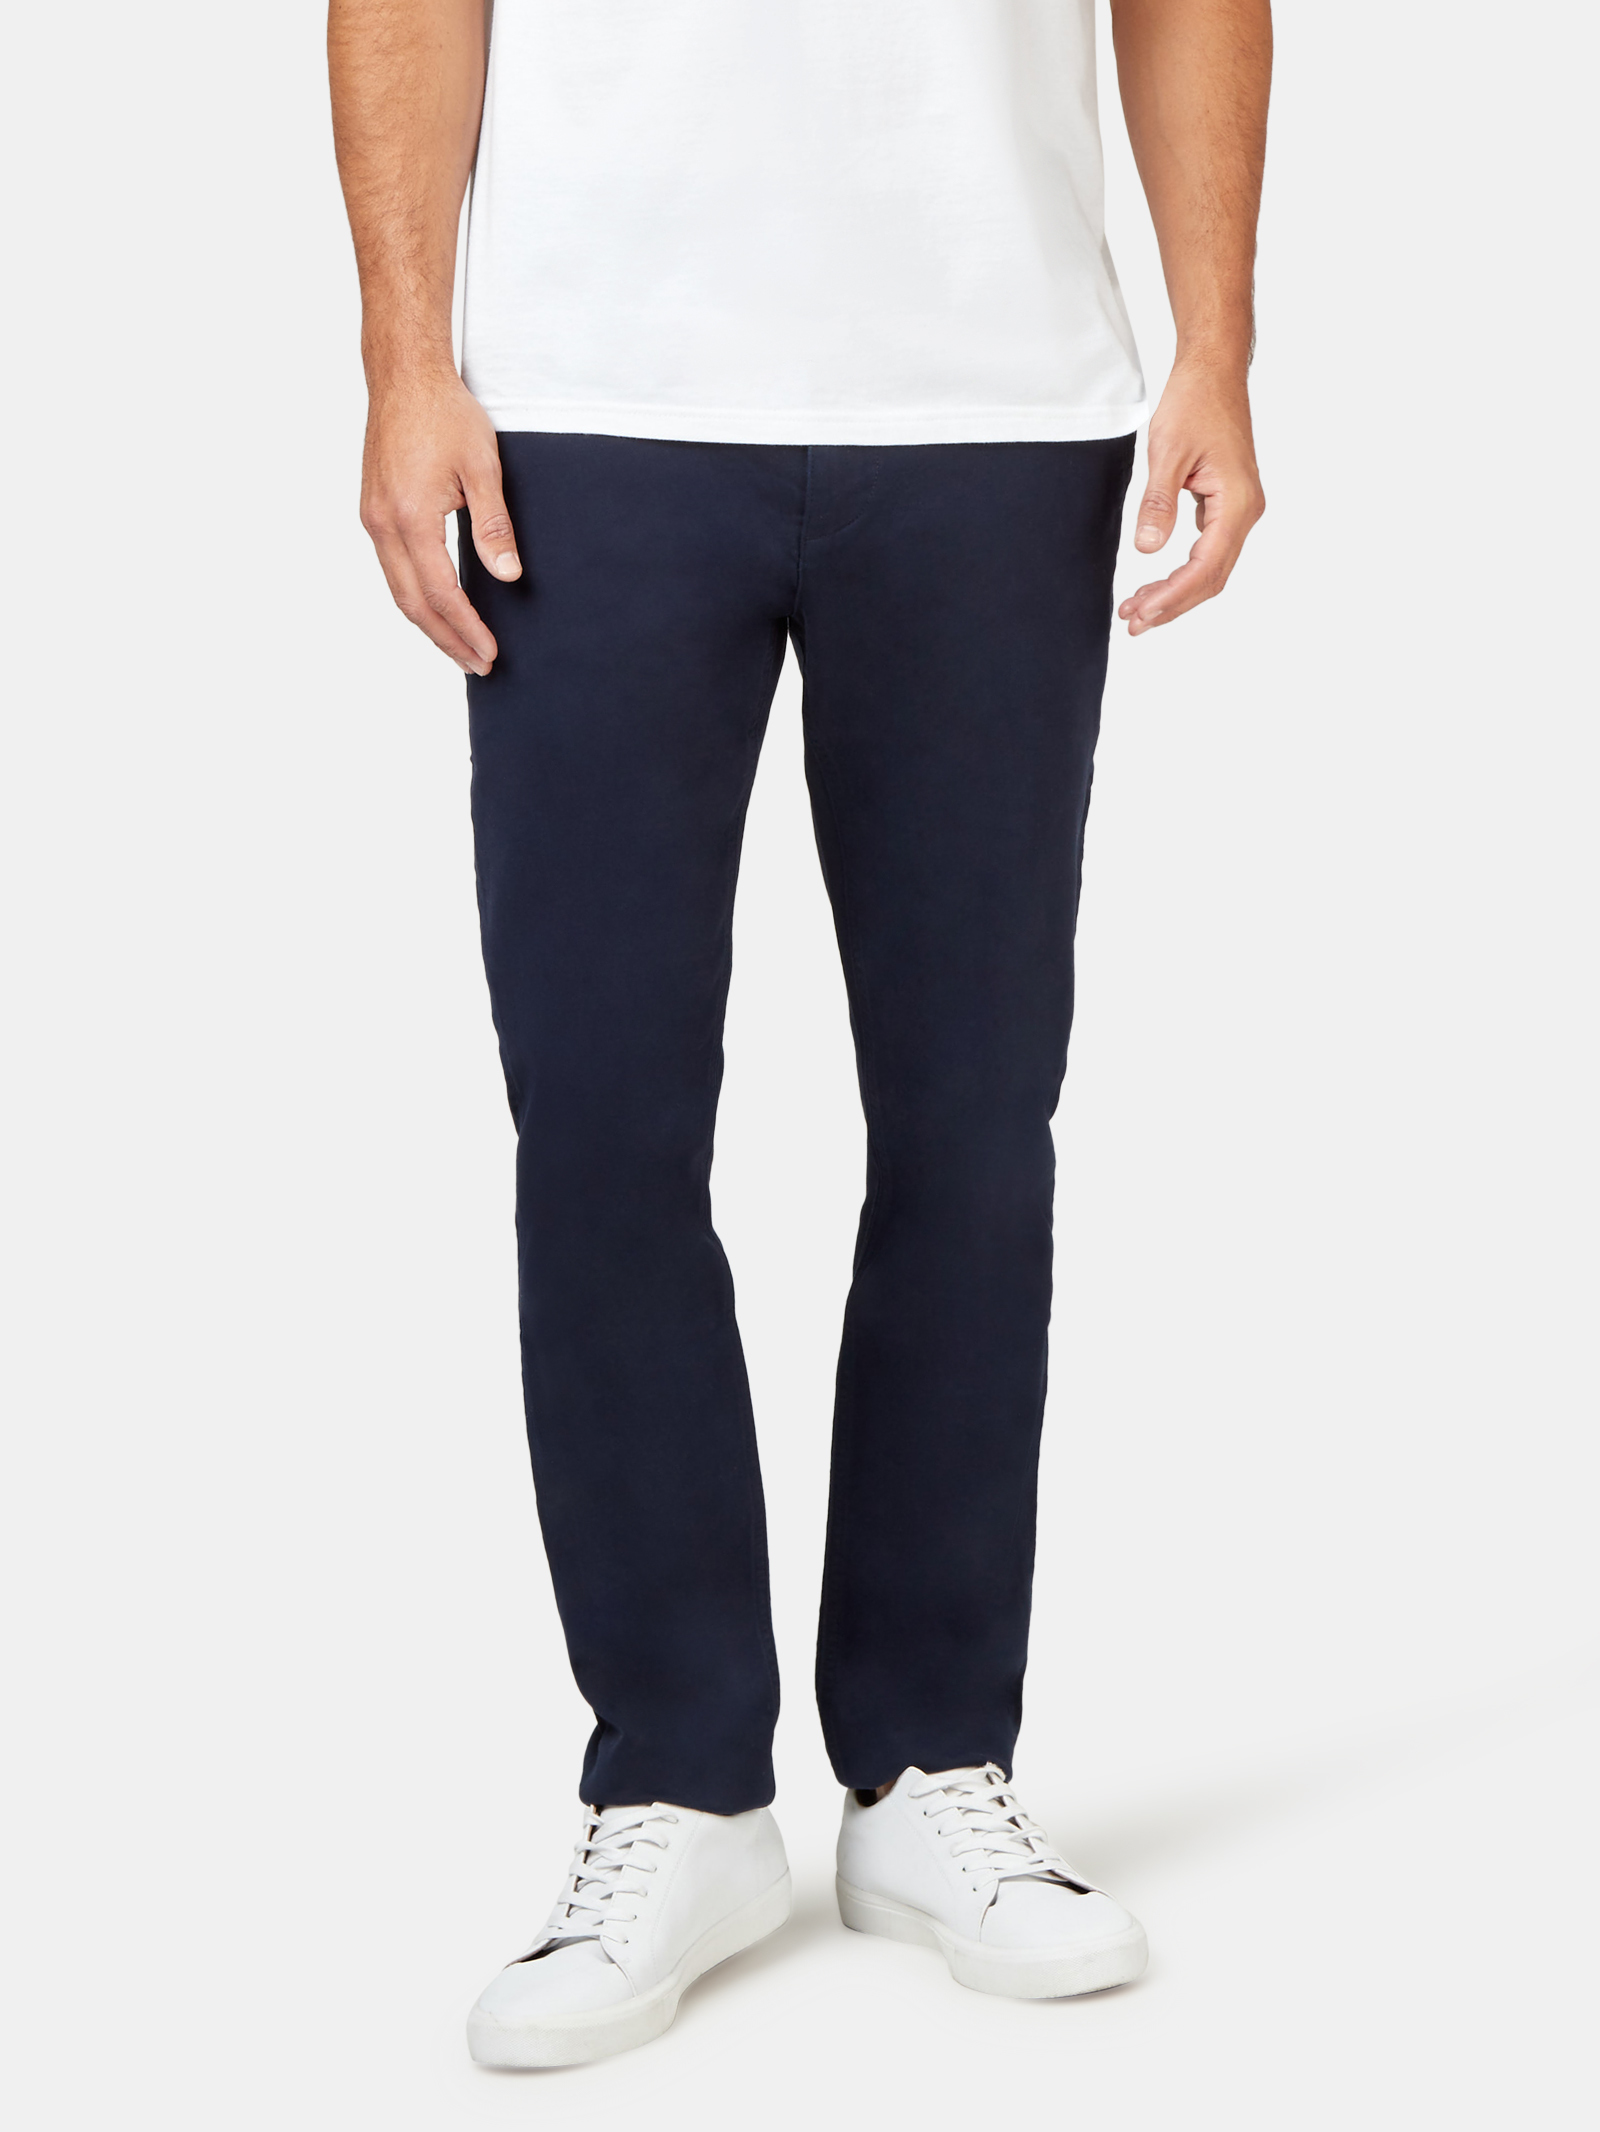 Miller Knit Chino Pant | Jeanswest